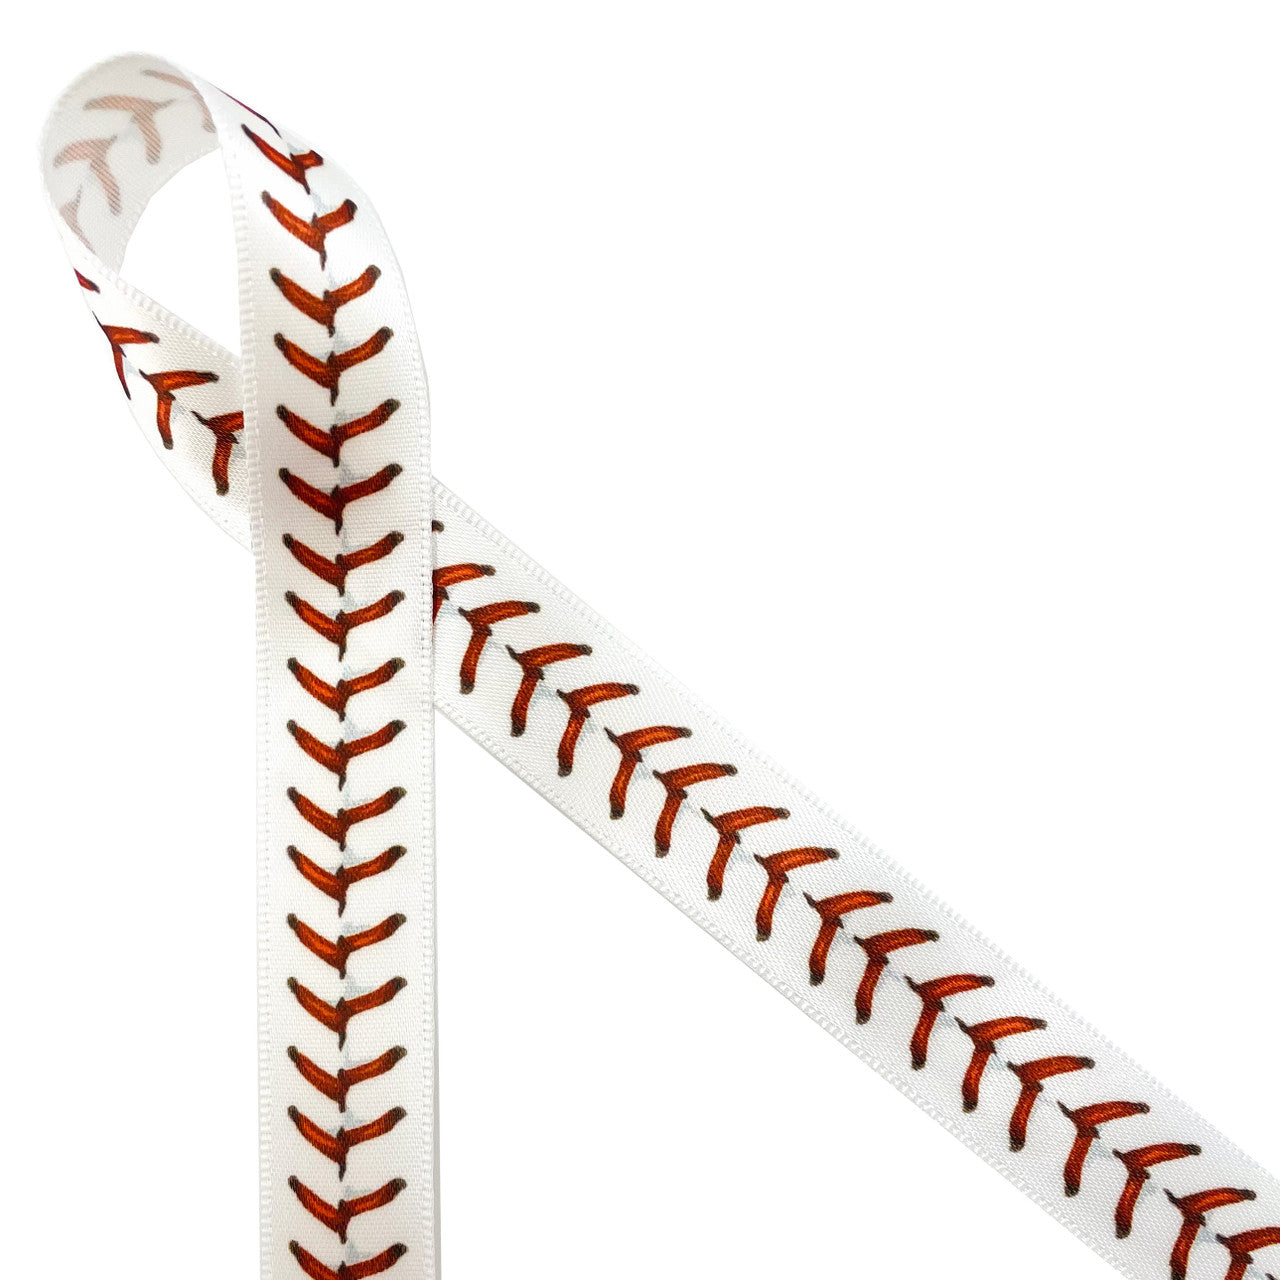 Baseball stitching in red on 5/8" white single face satin ribbon will make any baseball themed gift or favor a sure home run! Be sure to have this ribbon on hand for baseball banquets, gifts, favors, cookies and cake pops for your favorite baseball fan and player! All our ribbon is designed and printed in the USA